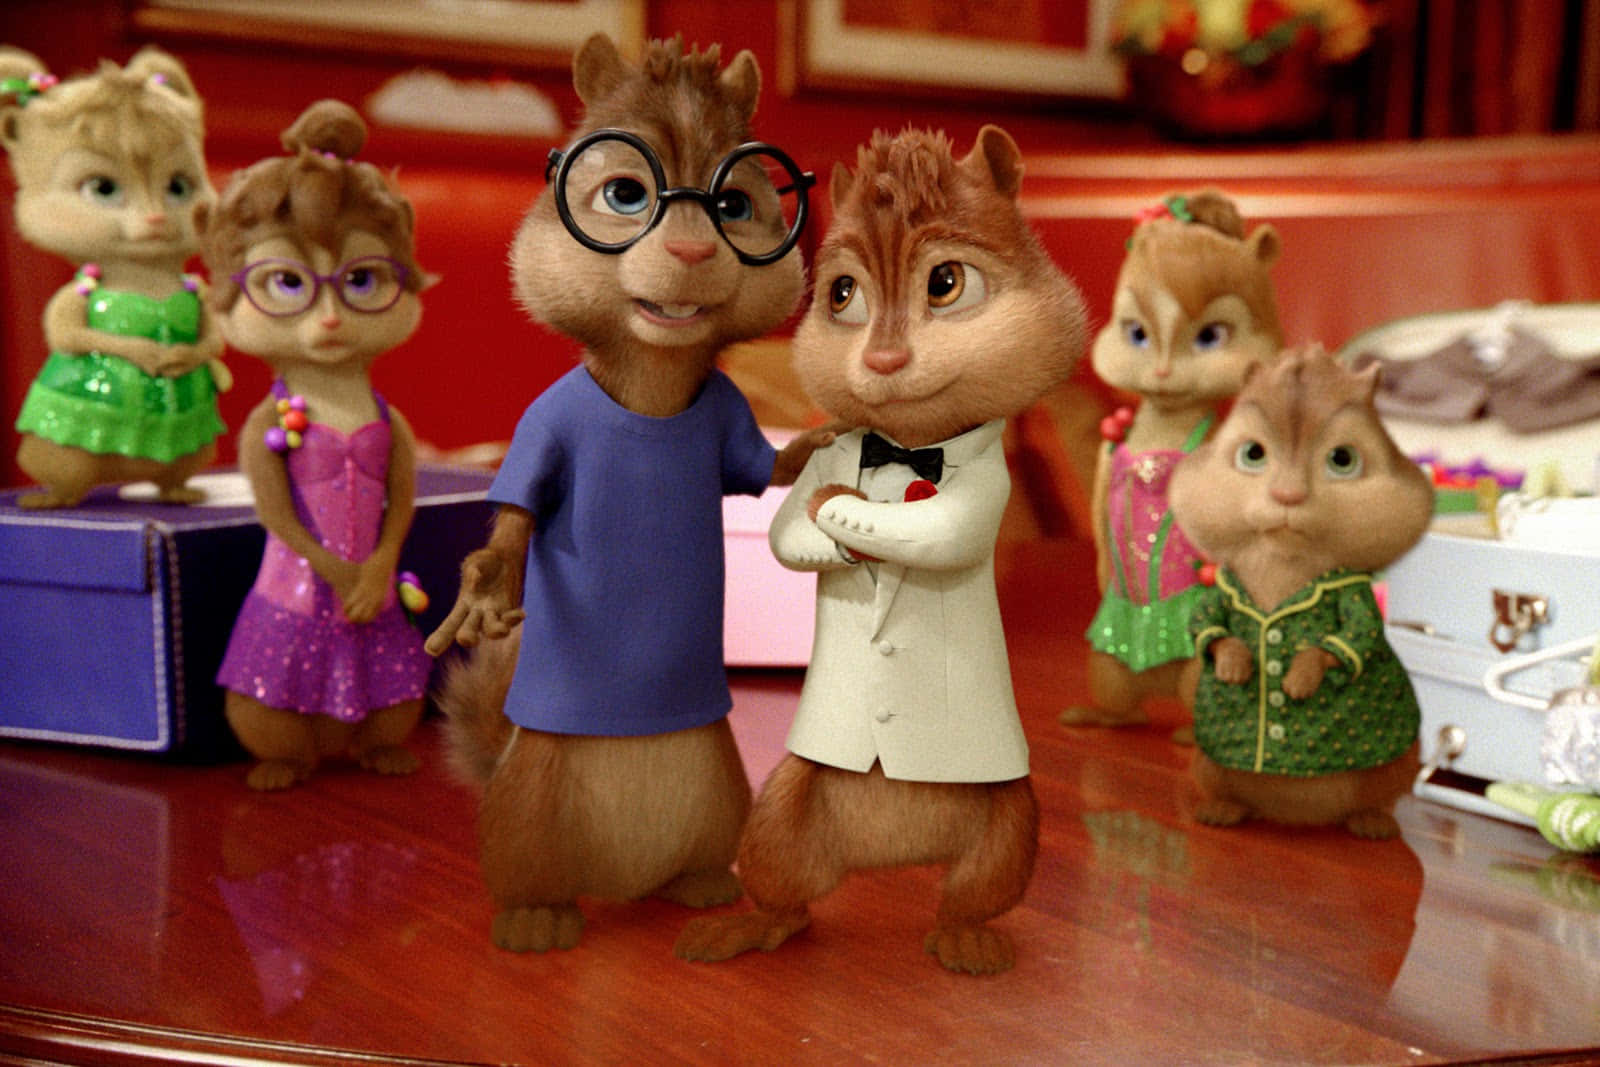 Enjoying a Movie Night with Alvin and the Chipmunks